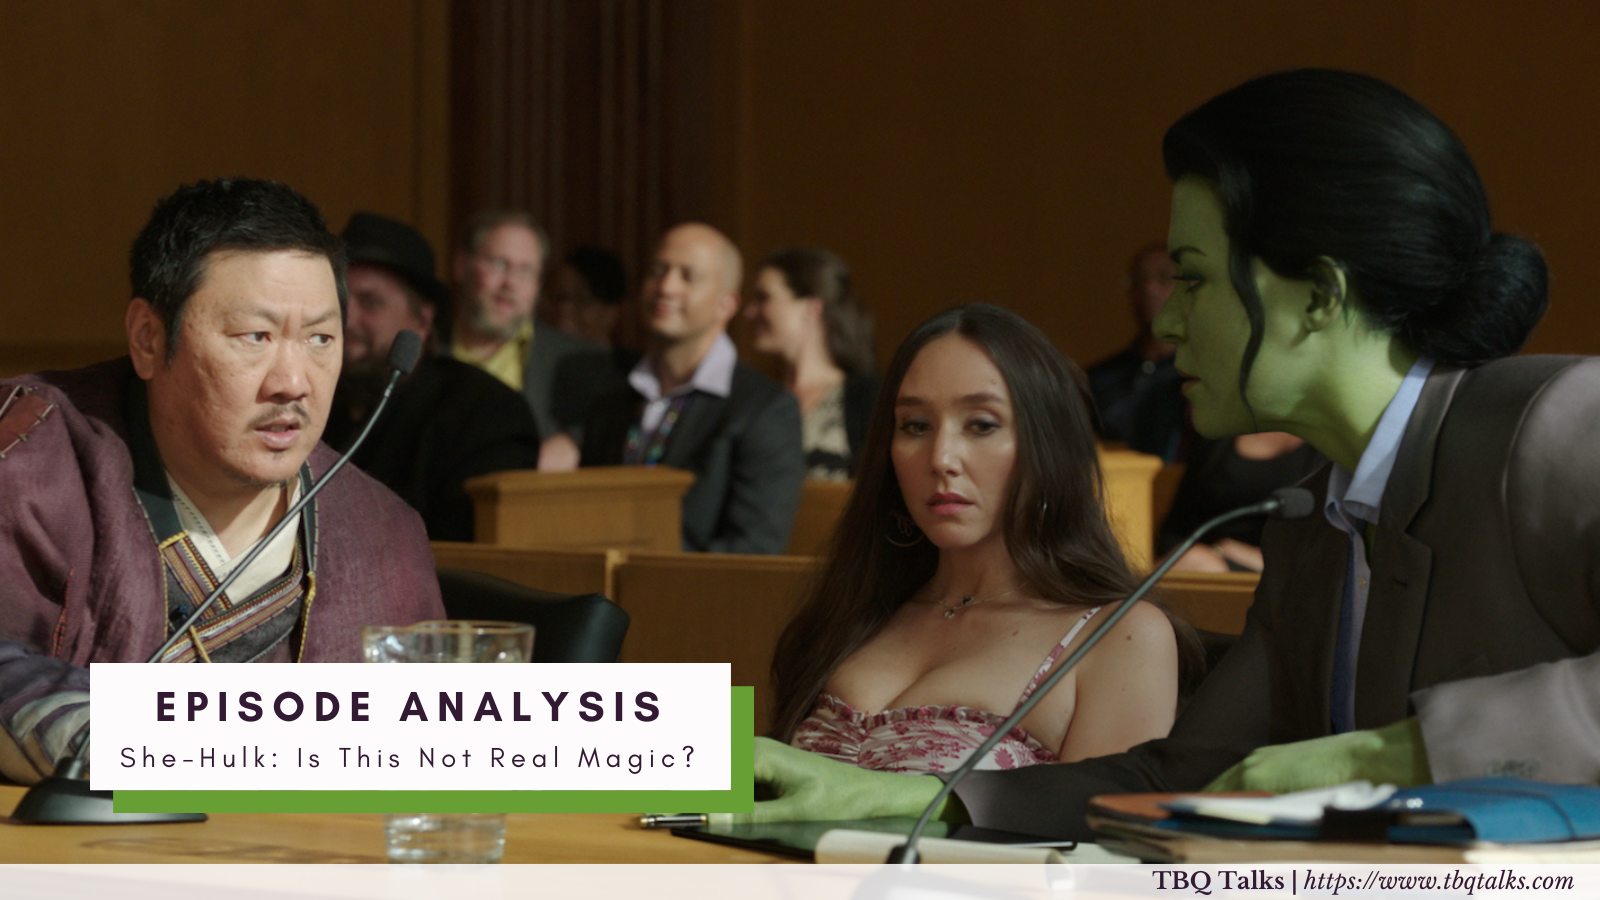 Episode Analysis She-Hulk: Is This Not Real Magic?